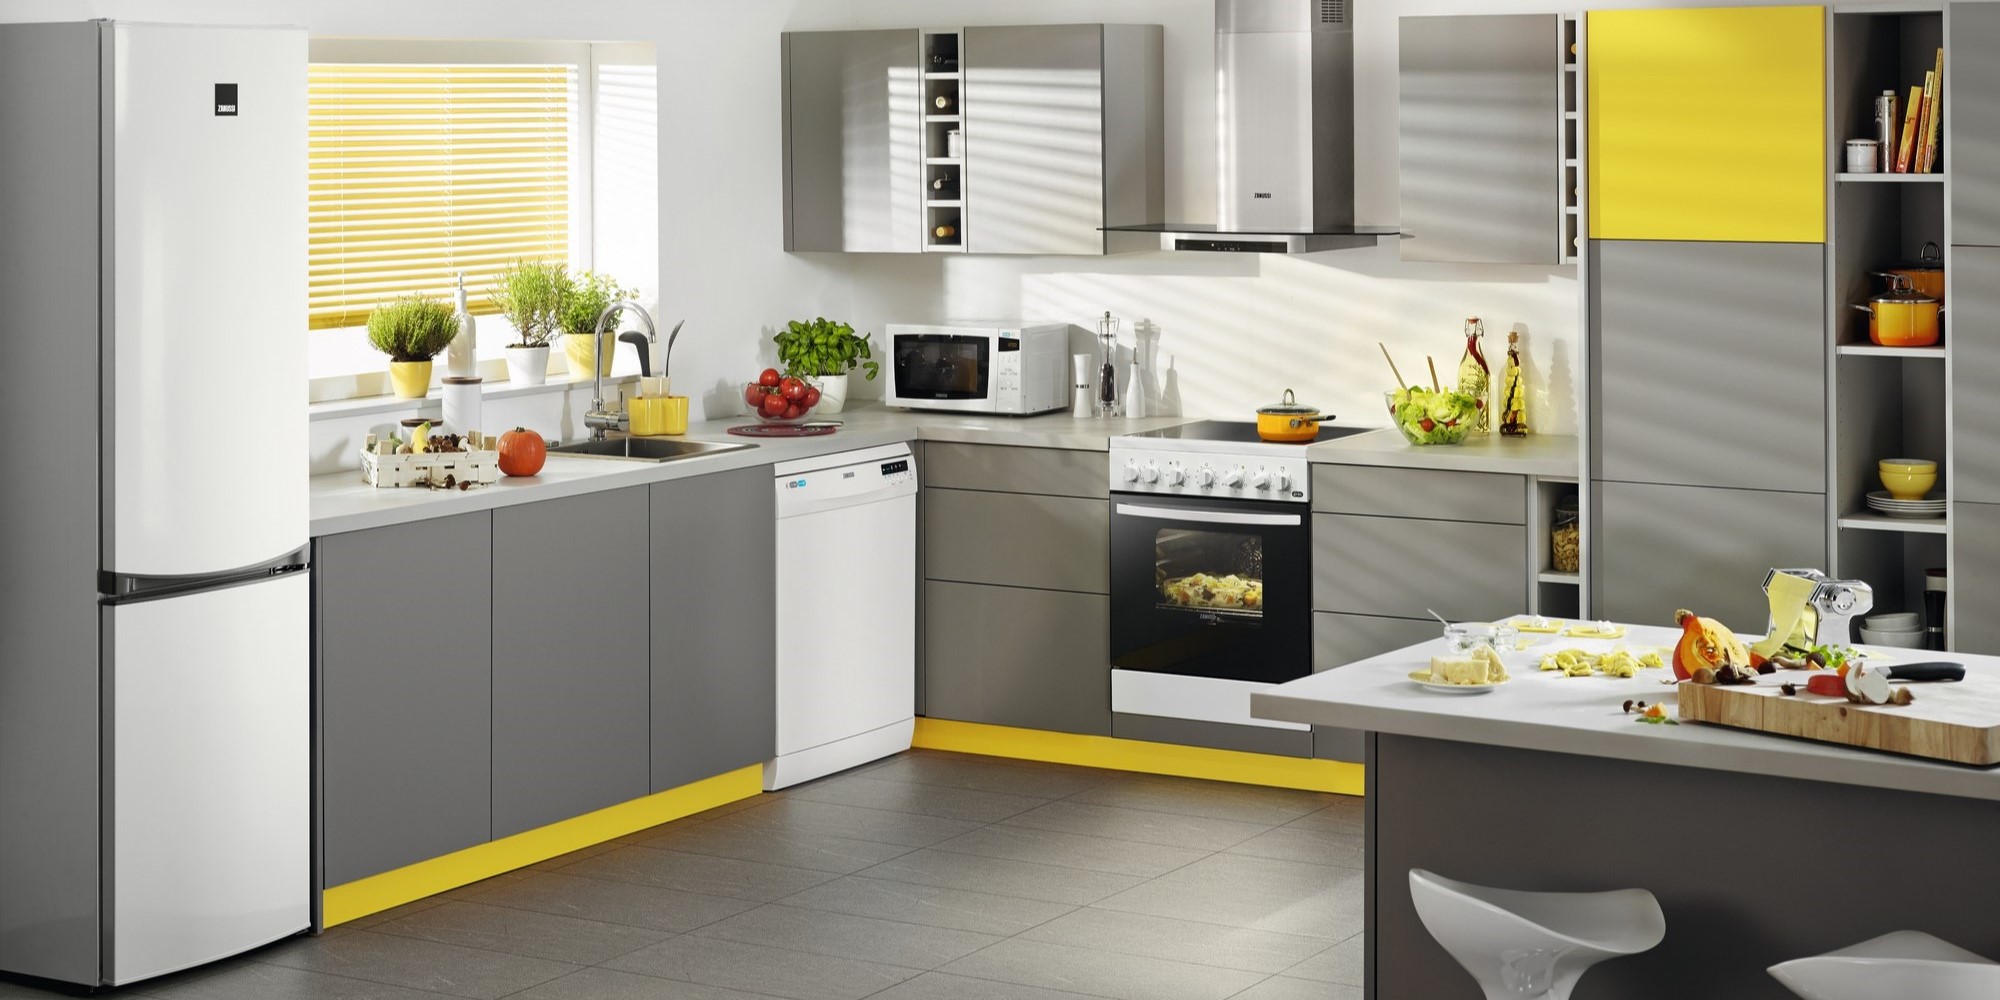 Stellisons Electrical  What Are Small Kitchen Appliances